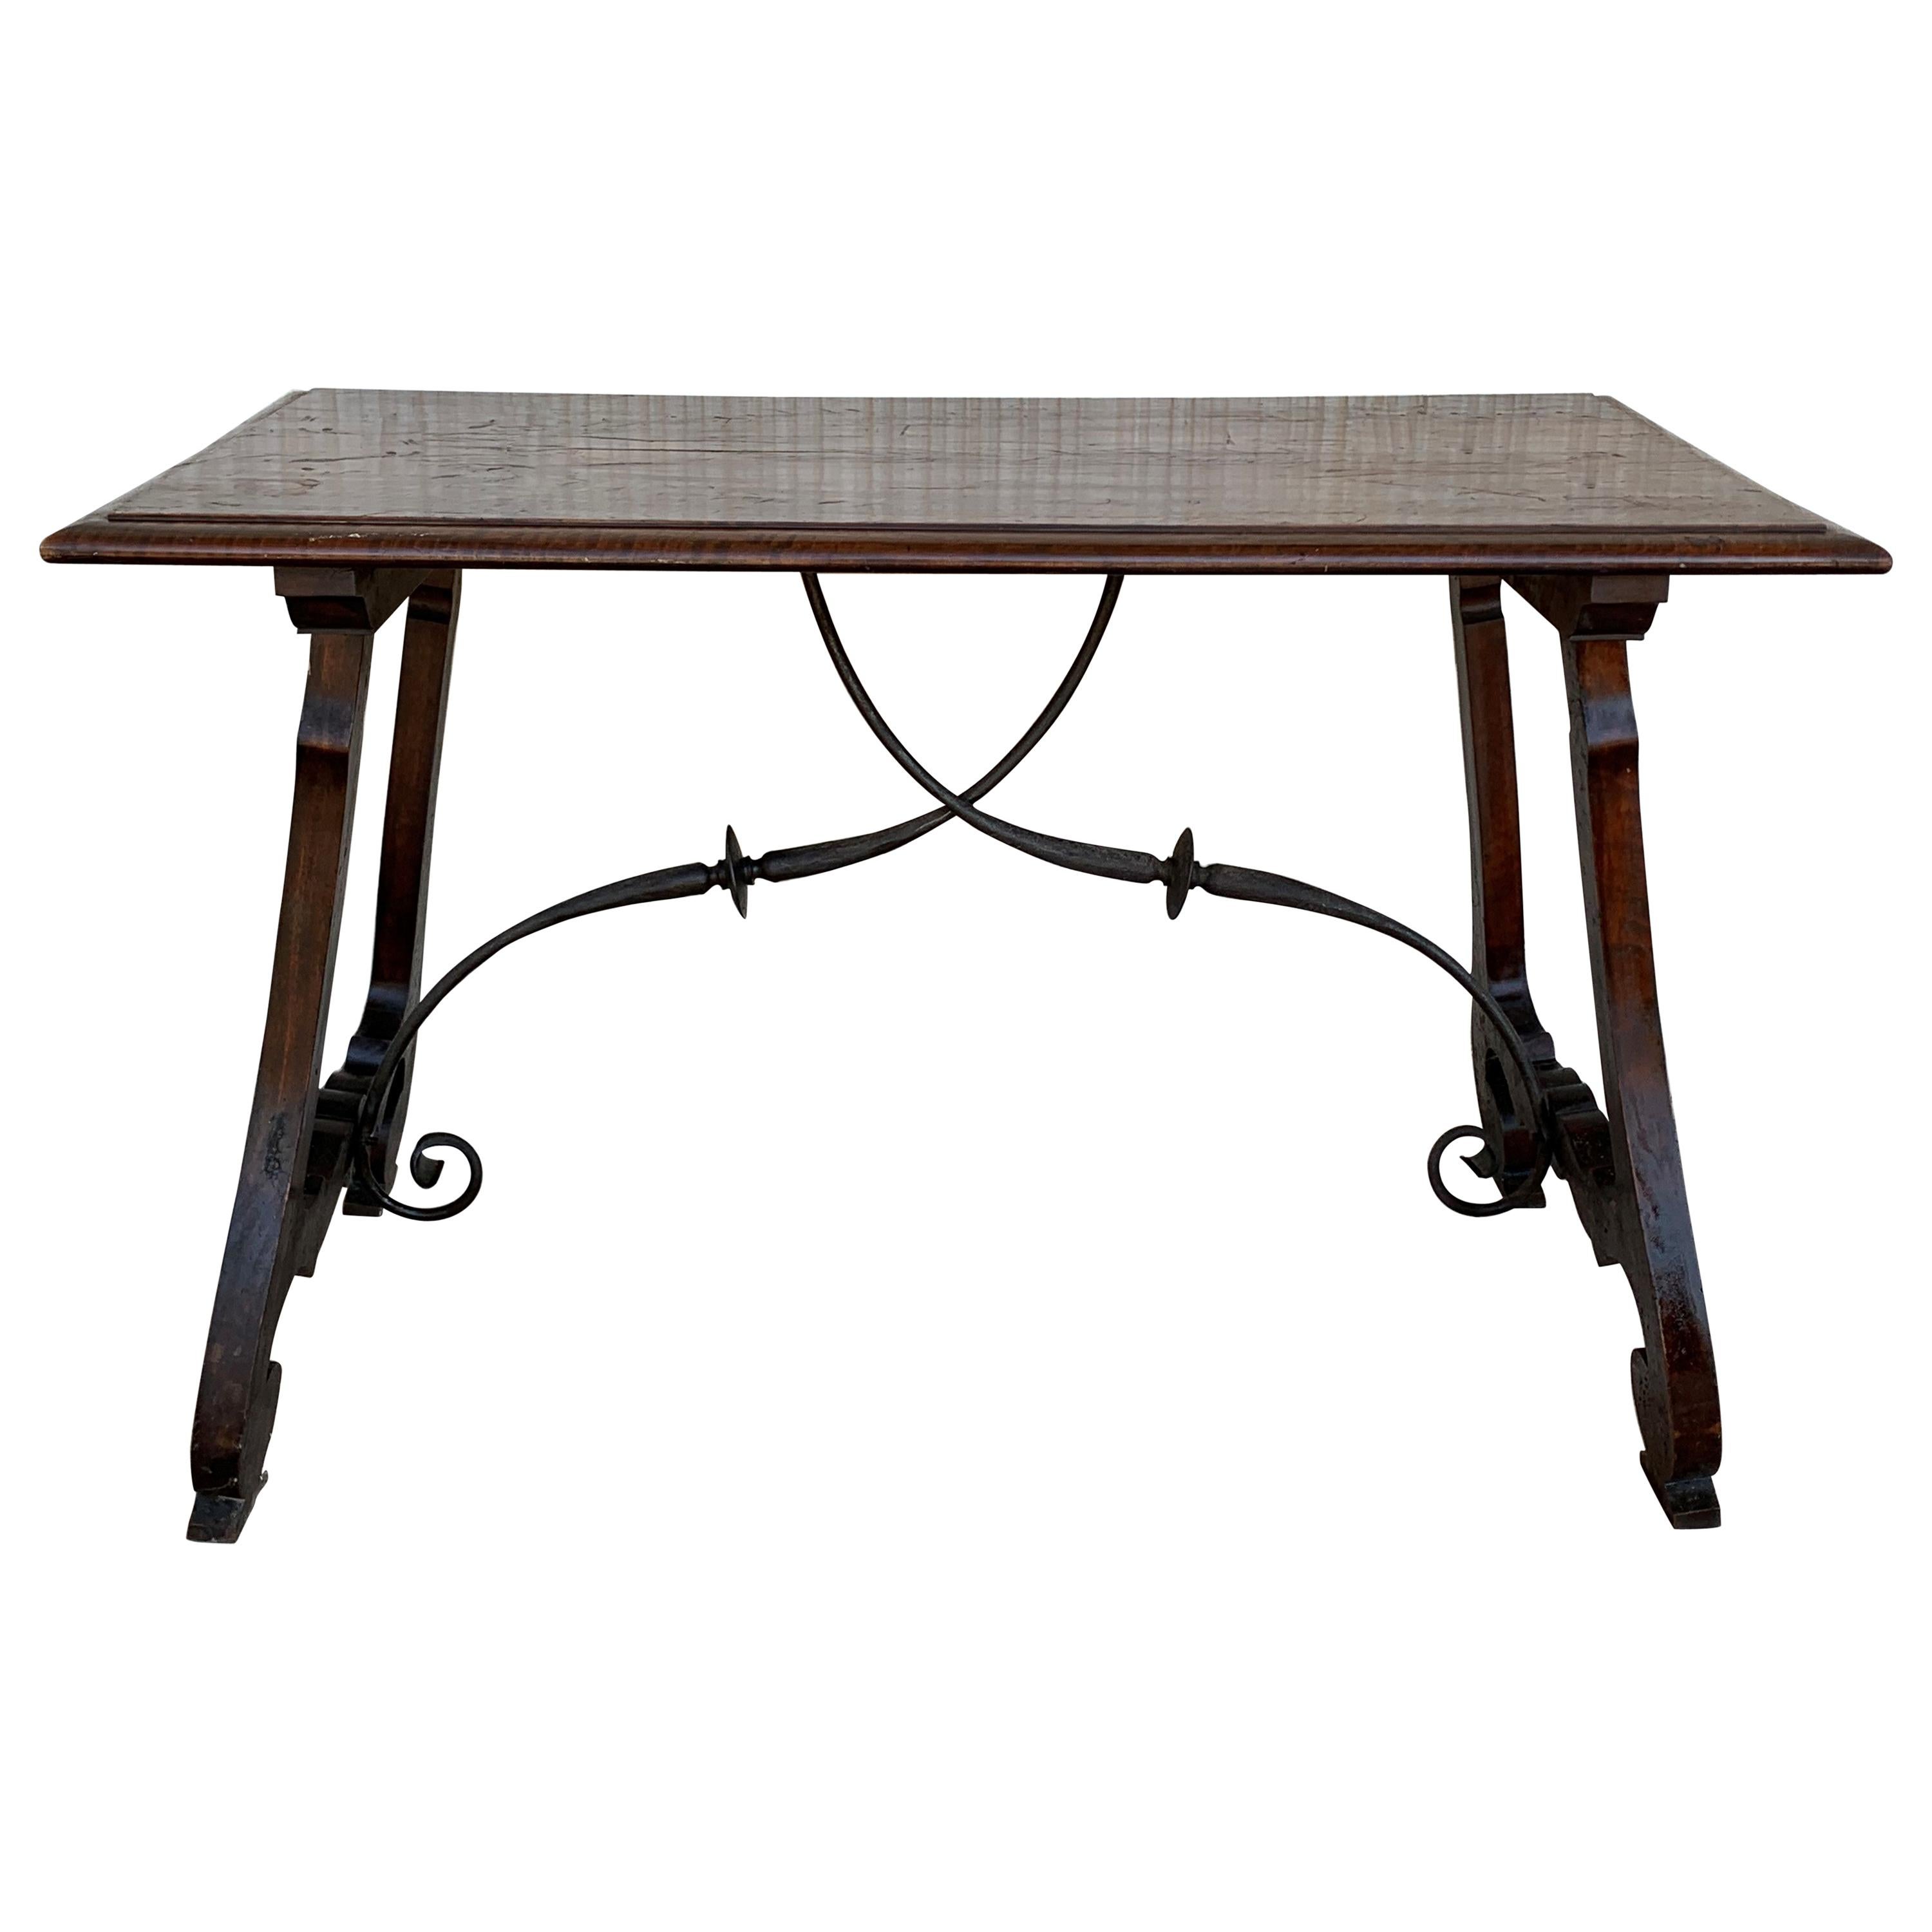 18th Century Refectory Spanish Table with Lyre Legs and Iron Stretch